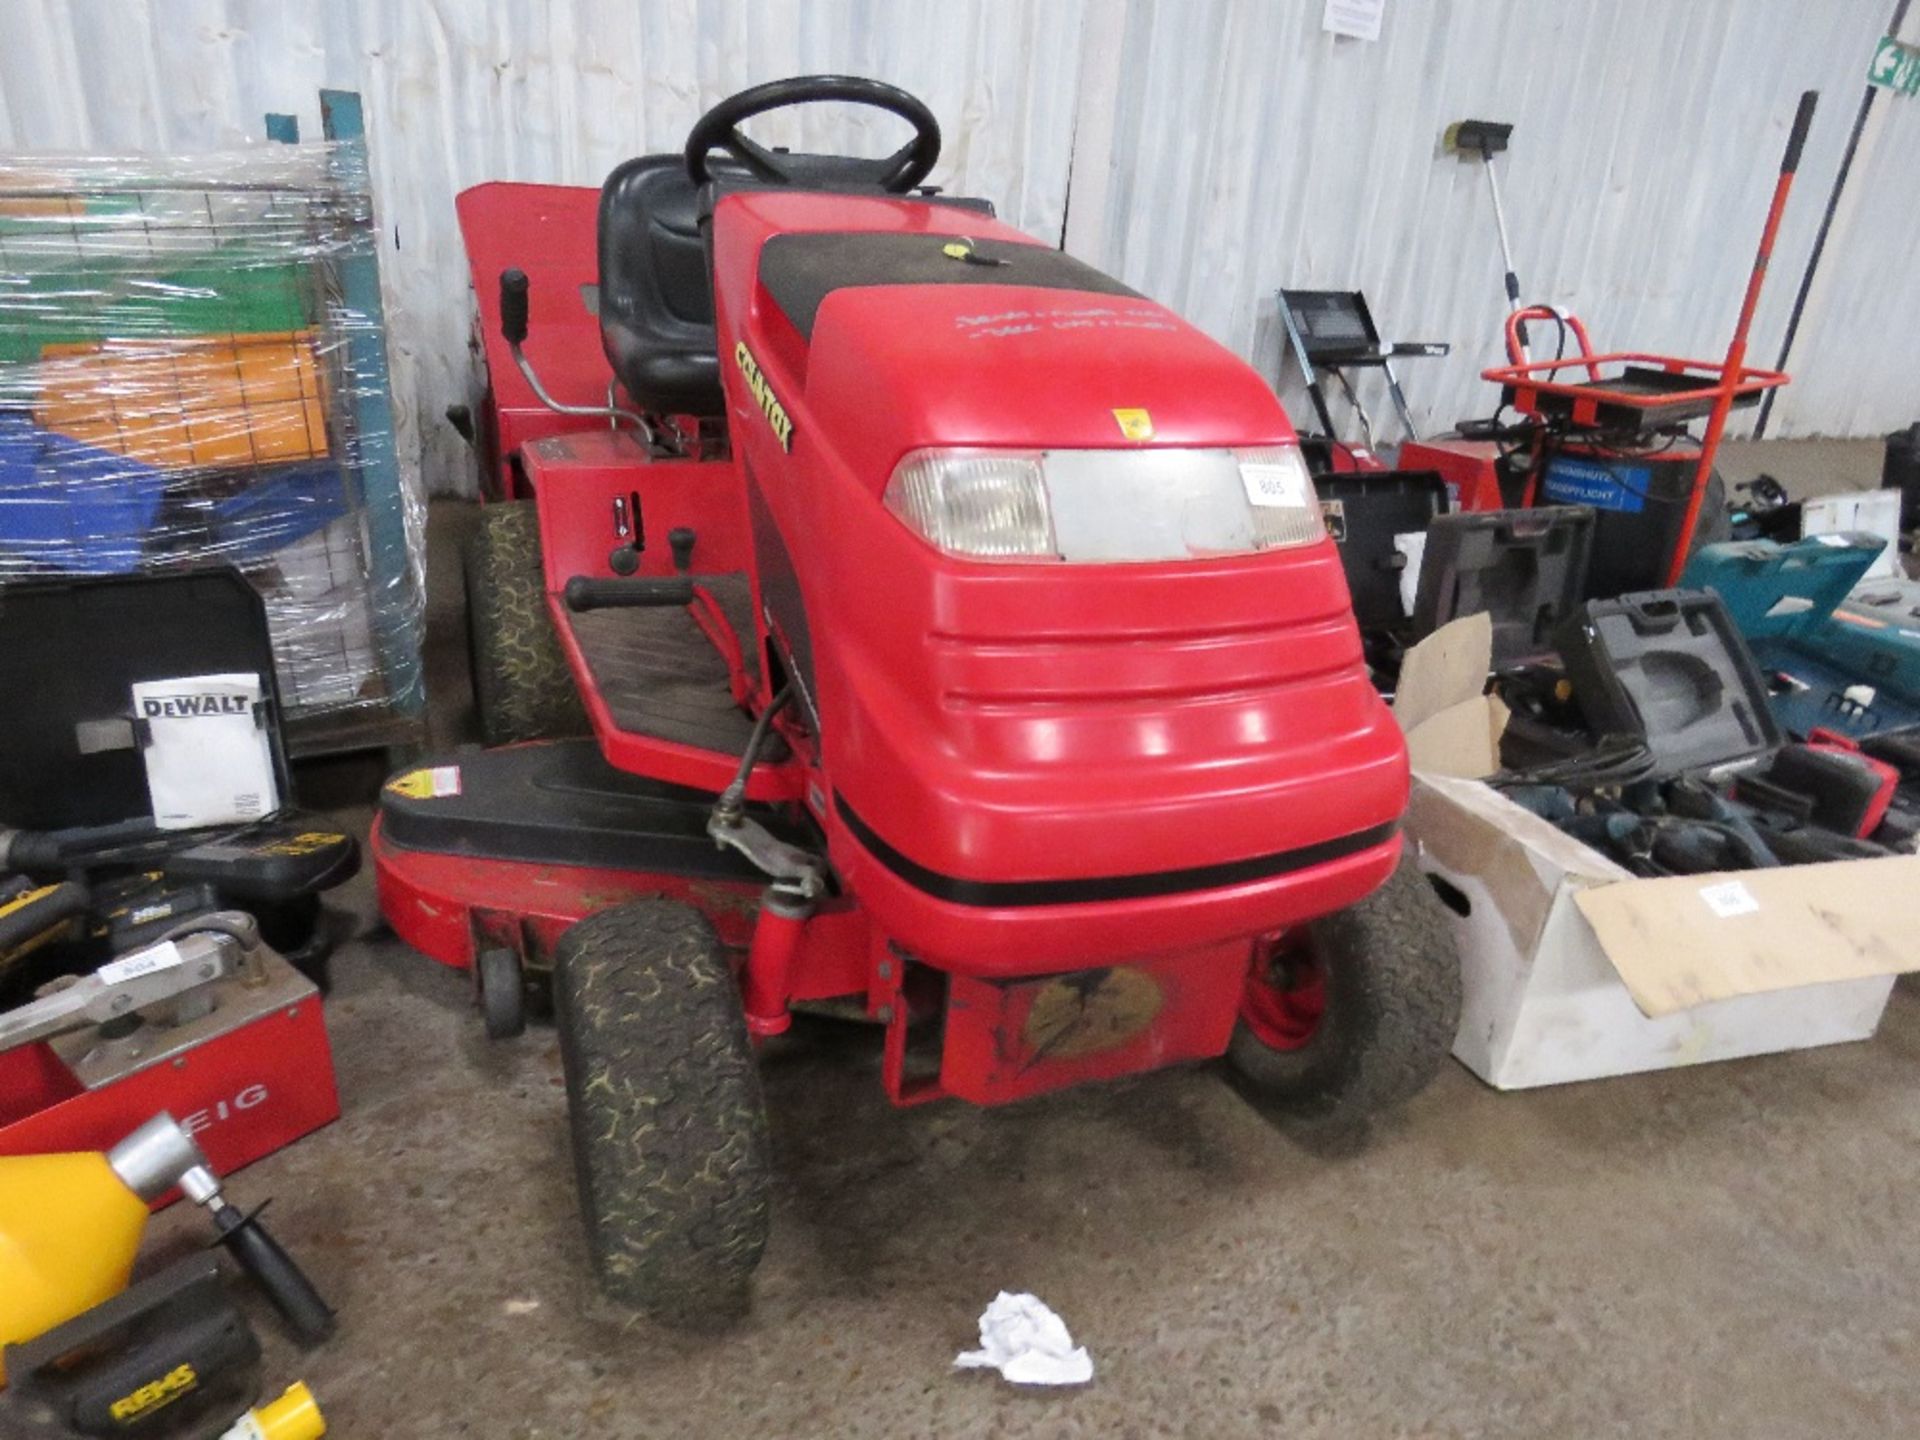 COUNTAX C800HE RIDE ON MOWER C/W COLLECTOR WHEN TESTED WAS SEEN TO RUN AND DRIVE AND MOWER TURNED